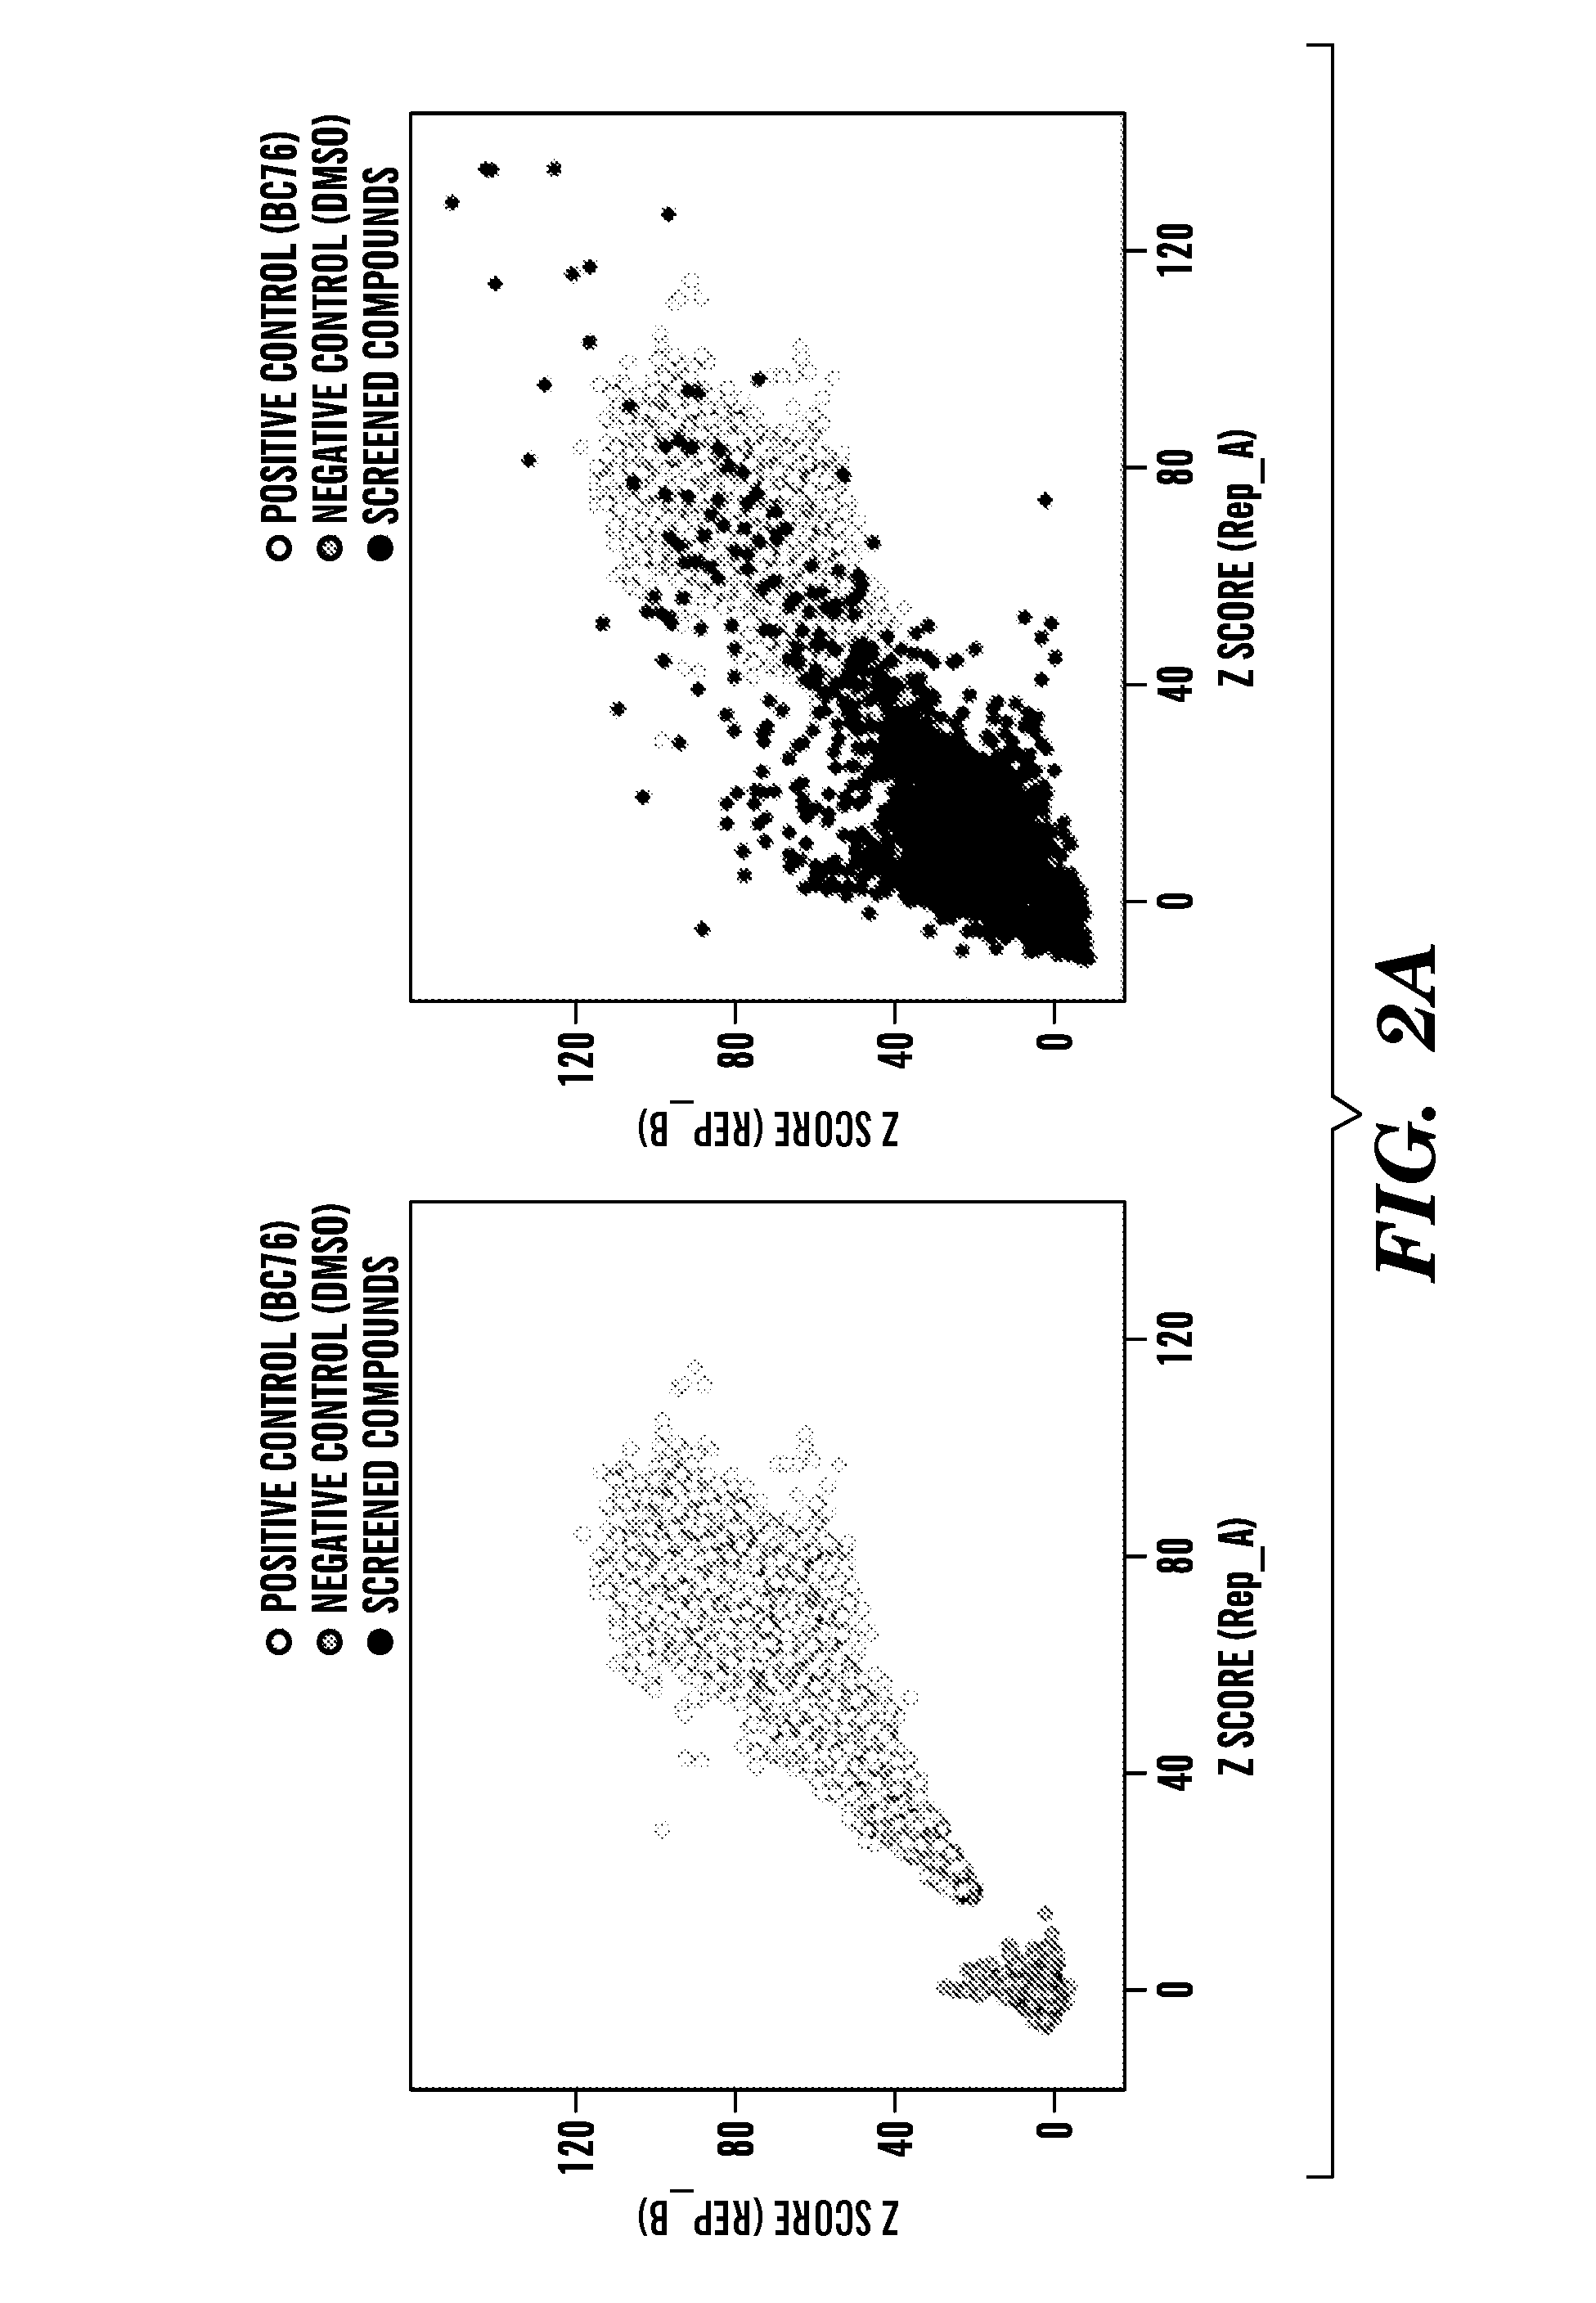 Inhibitors of phospodiesterases 11 (PDE11) and methods of use to elevate cortisol production